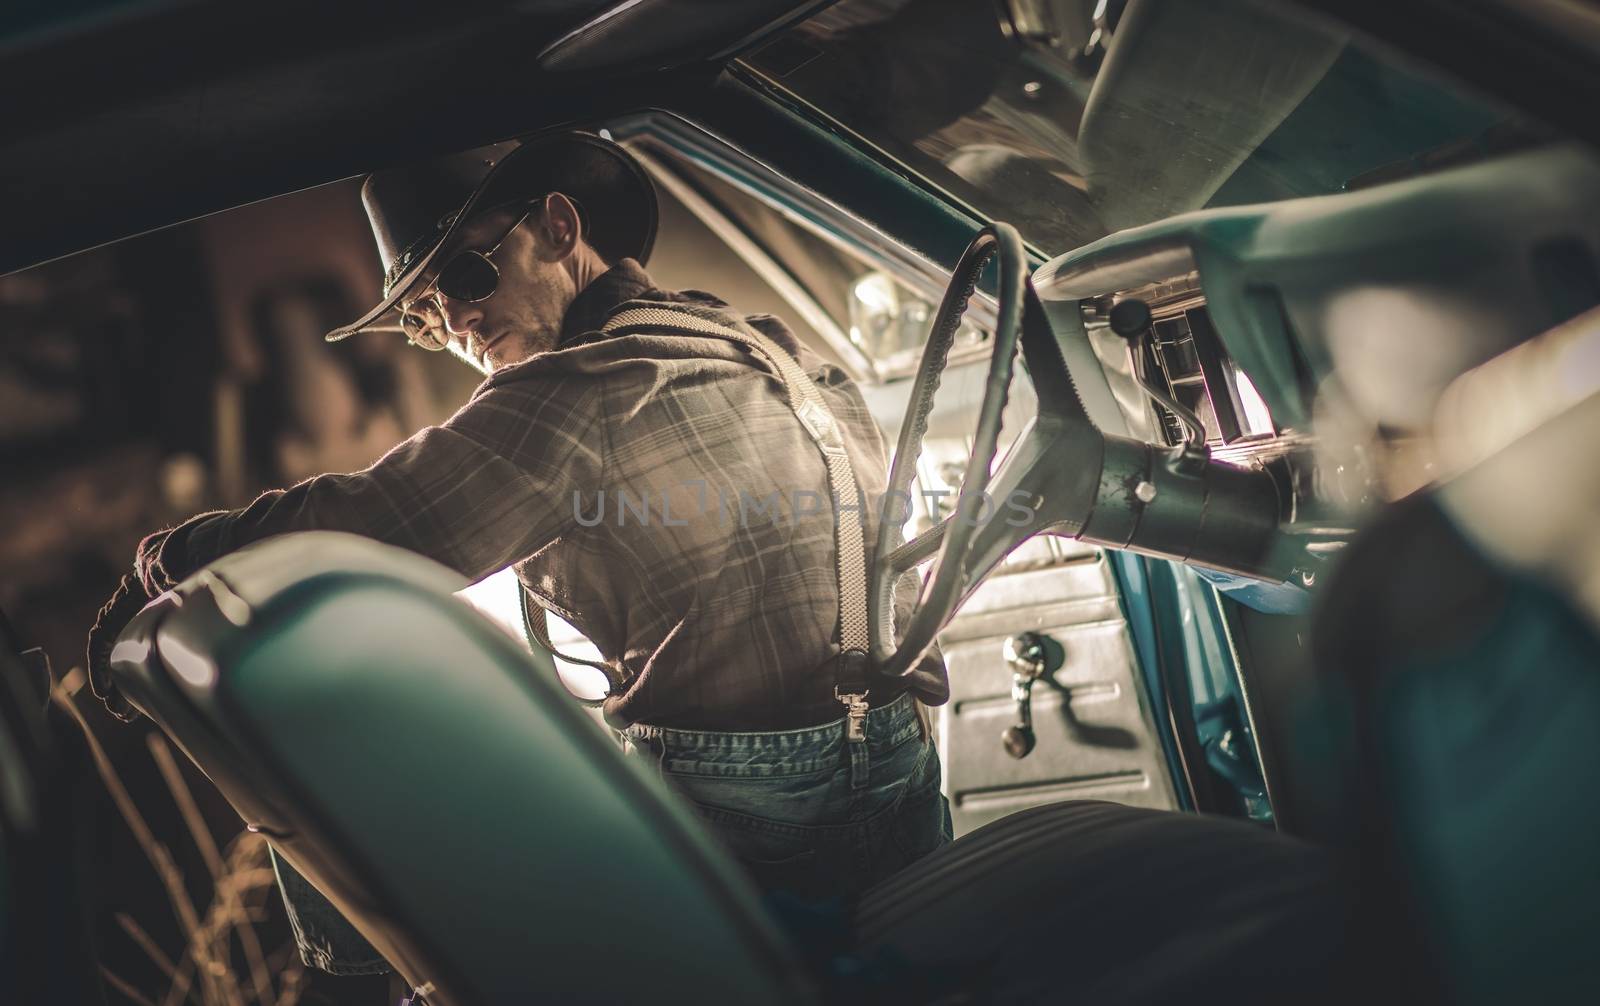 American Caucasian Cowboy Driver in His 30s Wearing Western Clothes and Sunglasses Seating Inside American Classic Muscle Car. American Countryside Theme.